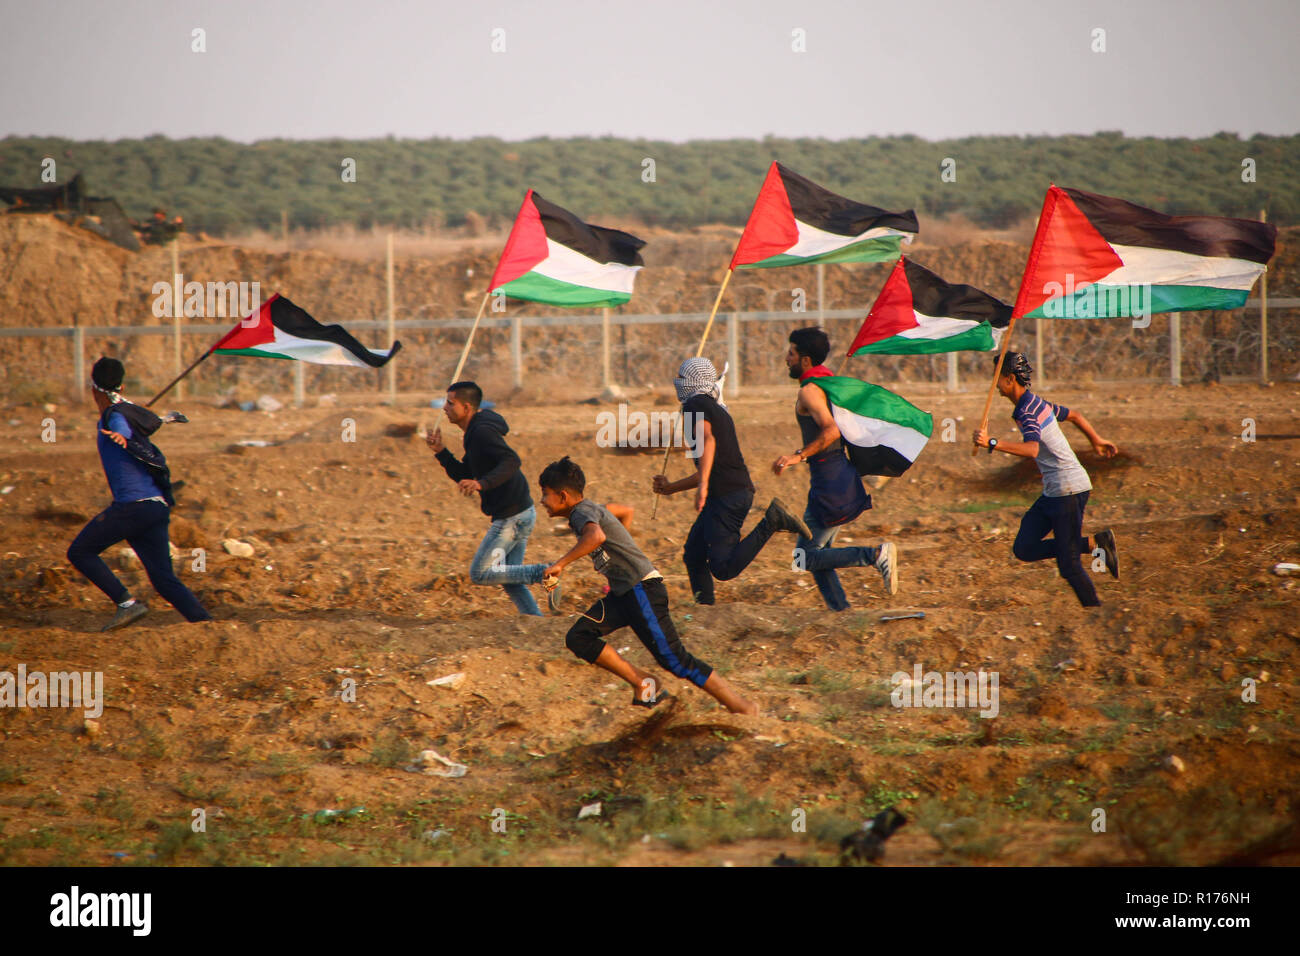 Palestinian youth are seen flying Palestine flags during the protest. Demonstration between the Israeli soldiers and Palestinian citizens during a protest against the decision of President Trump to recognise Jerusalem as the capital of Israel and rejects the Israeli siege at the Gaza Strip. Stock Photo